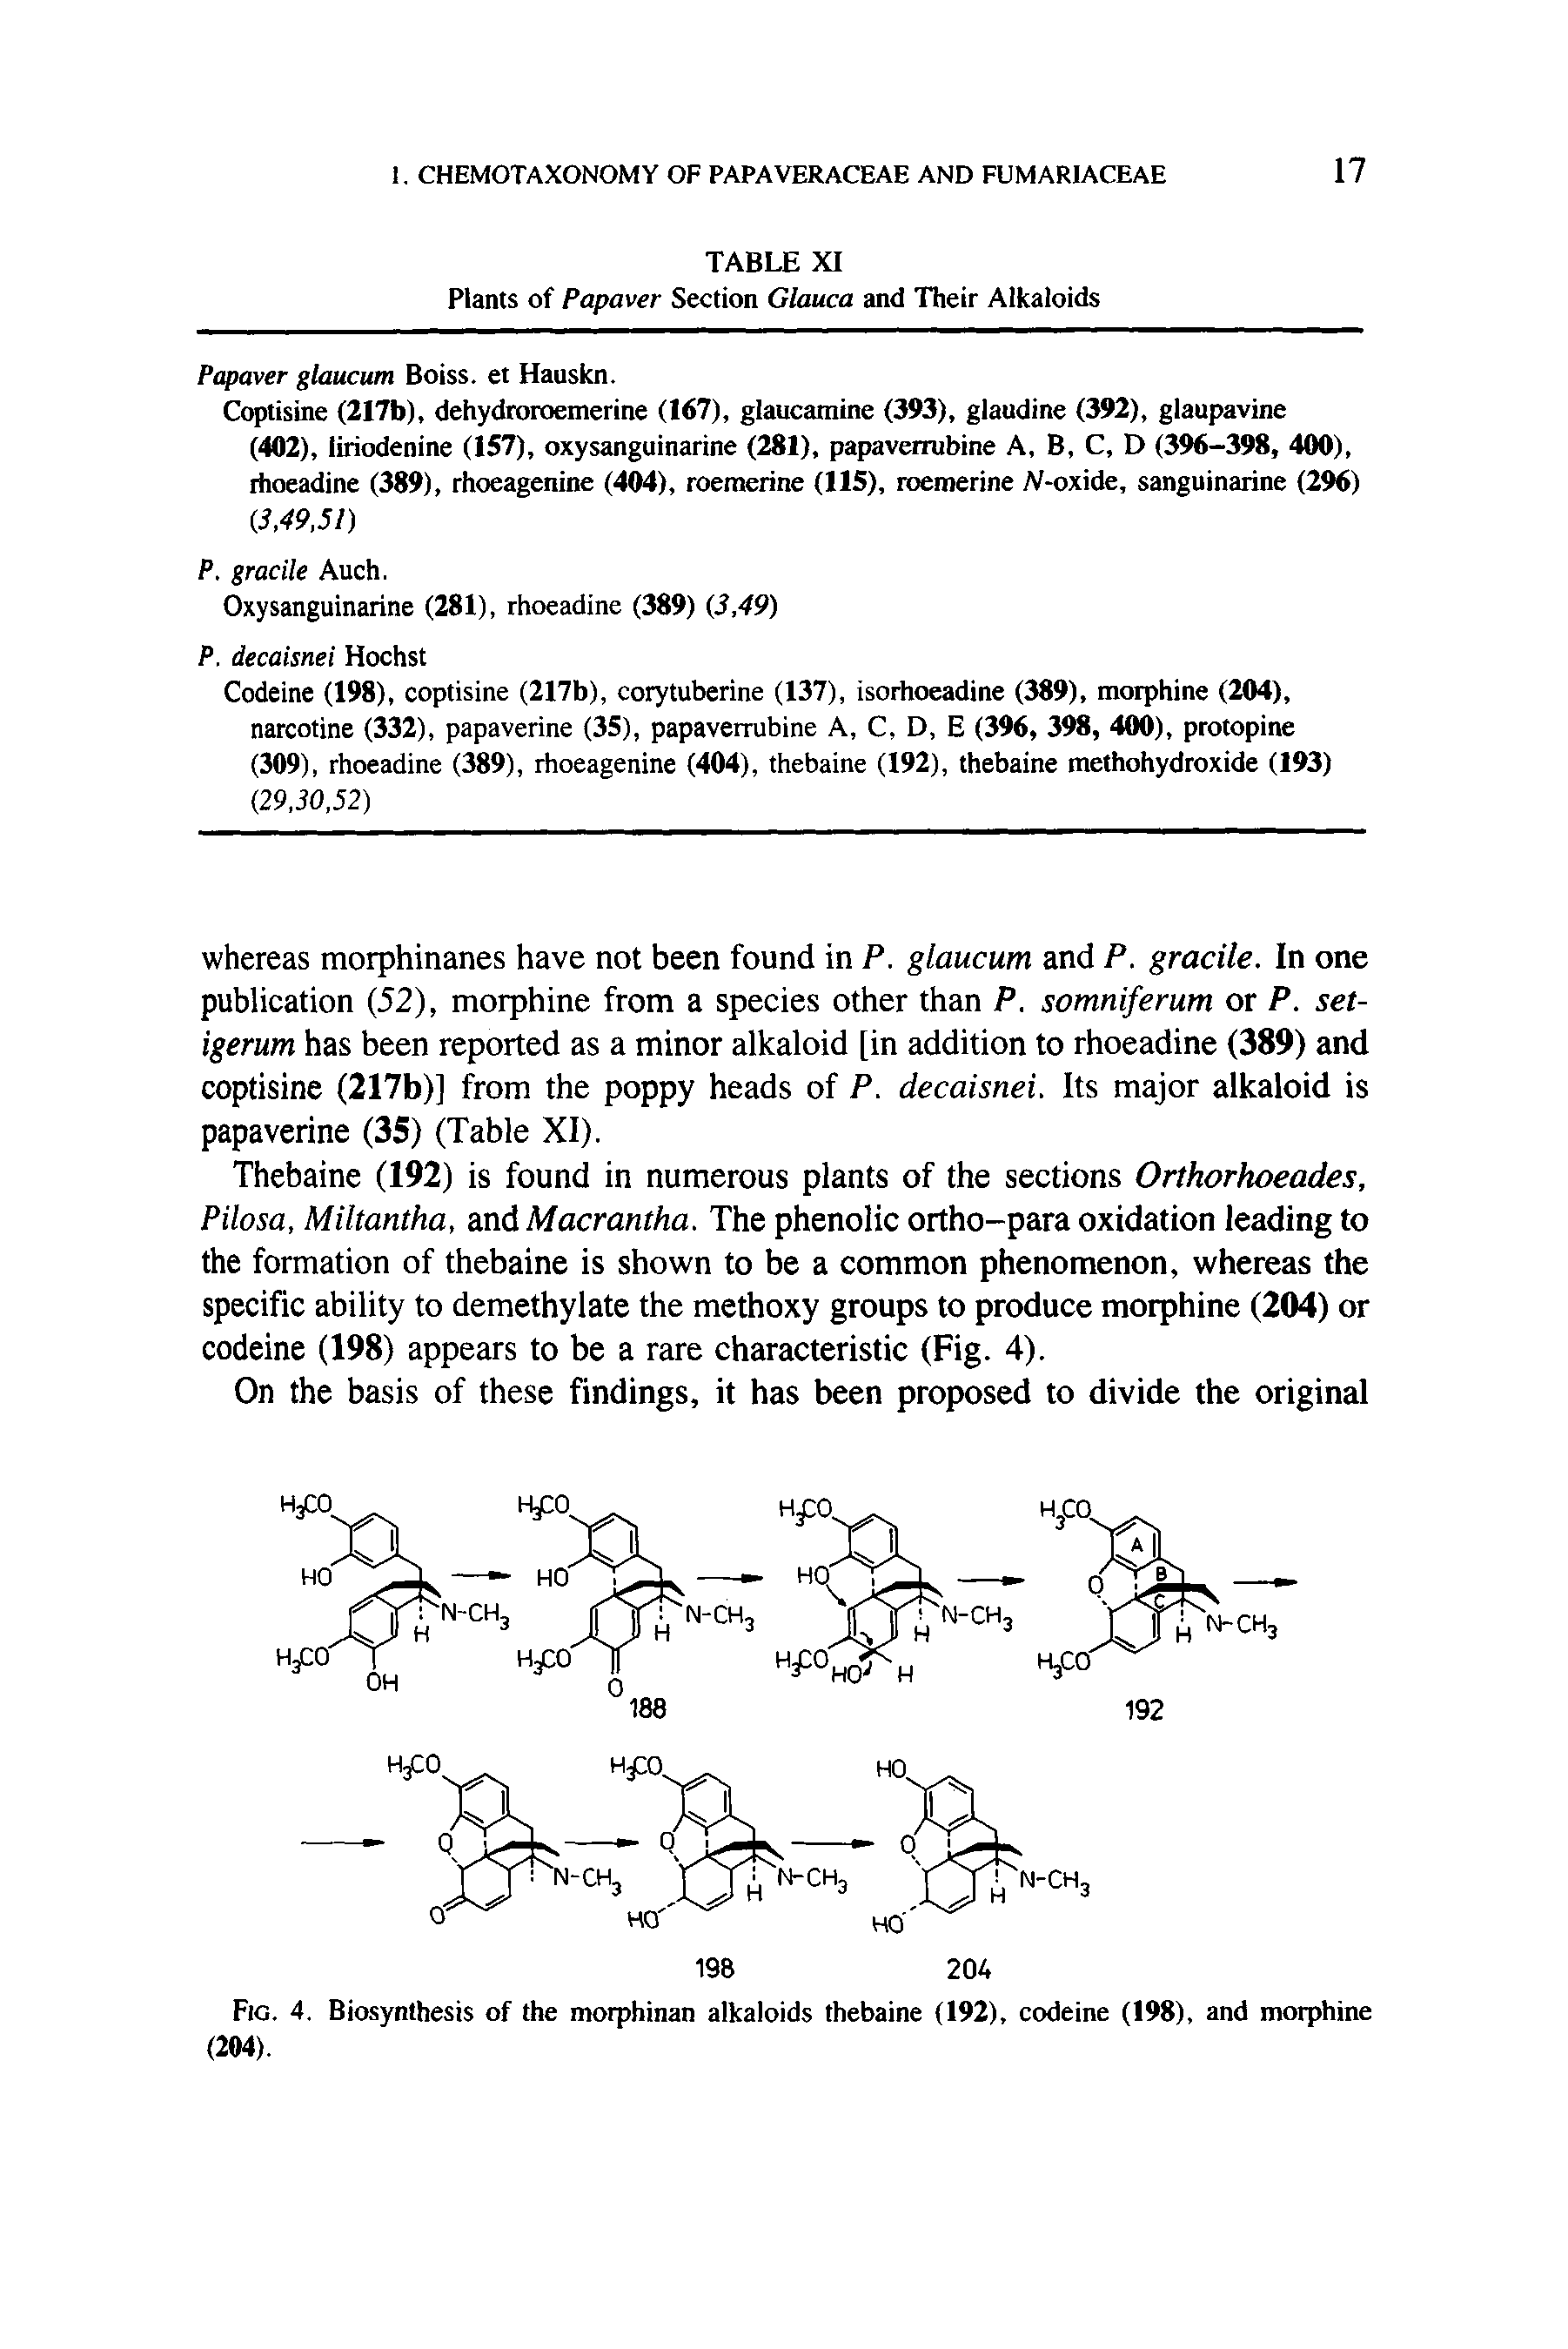 Fig. 4. Biosynthesis of the morphinan alkaloids thebaine (192), codeine (198), and morphine (204).